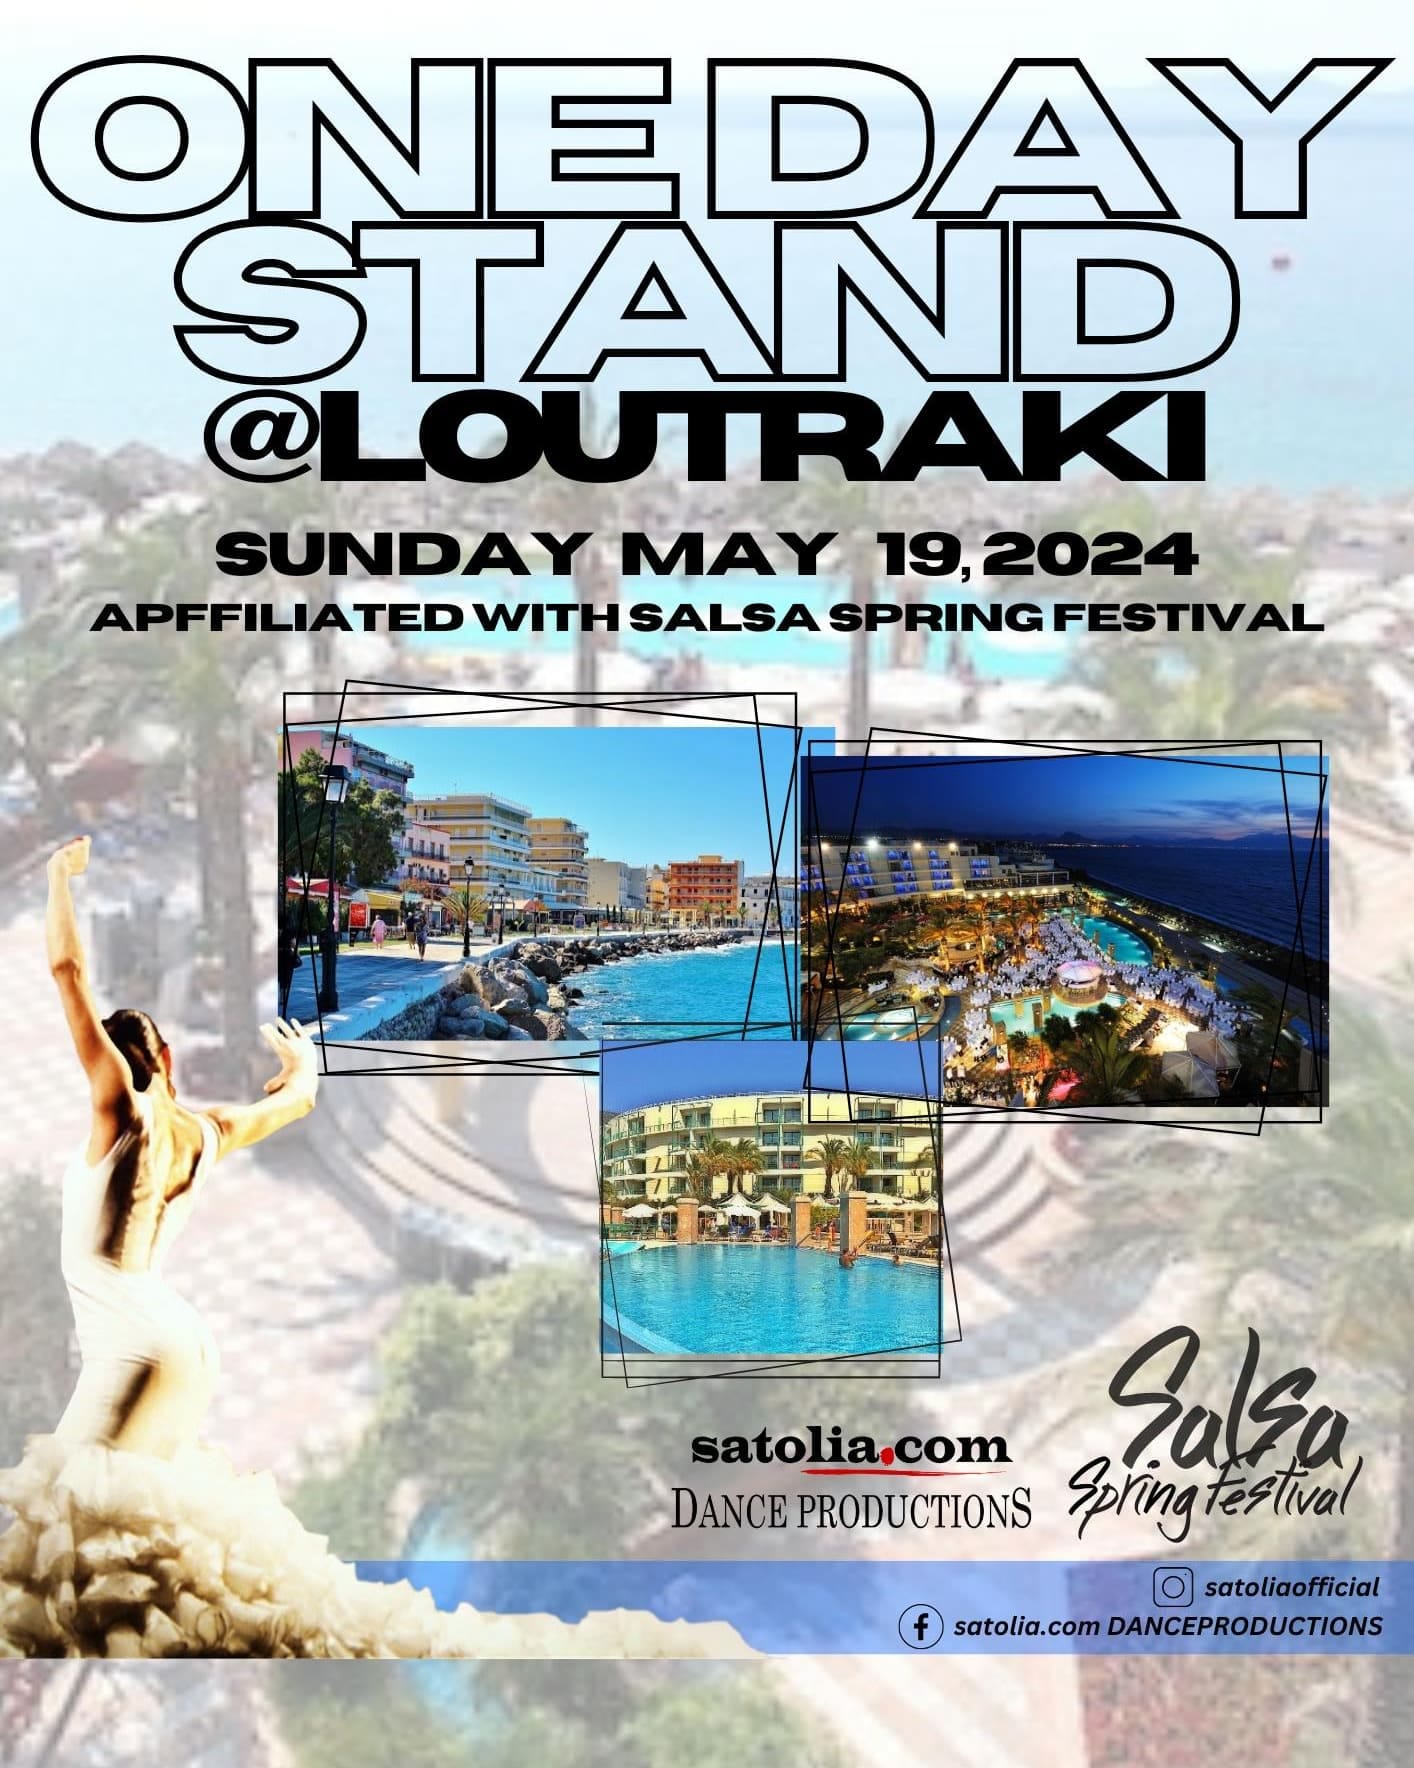 One day stand @Loutraki